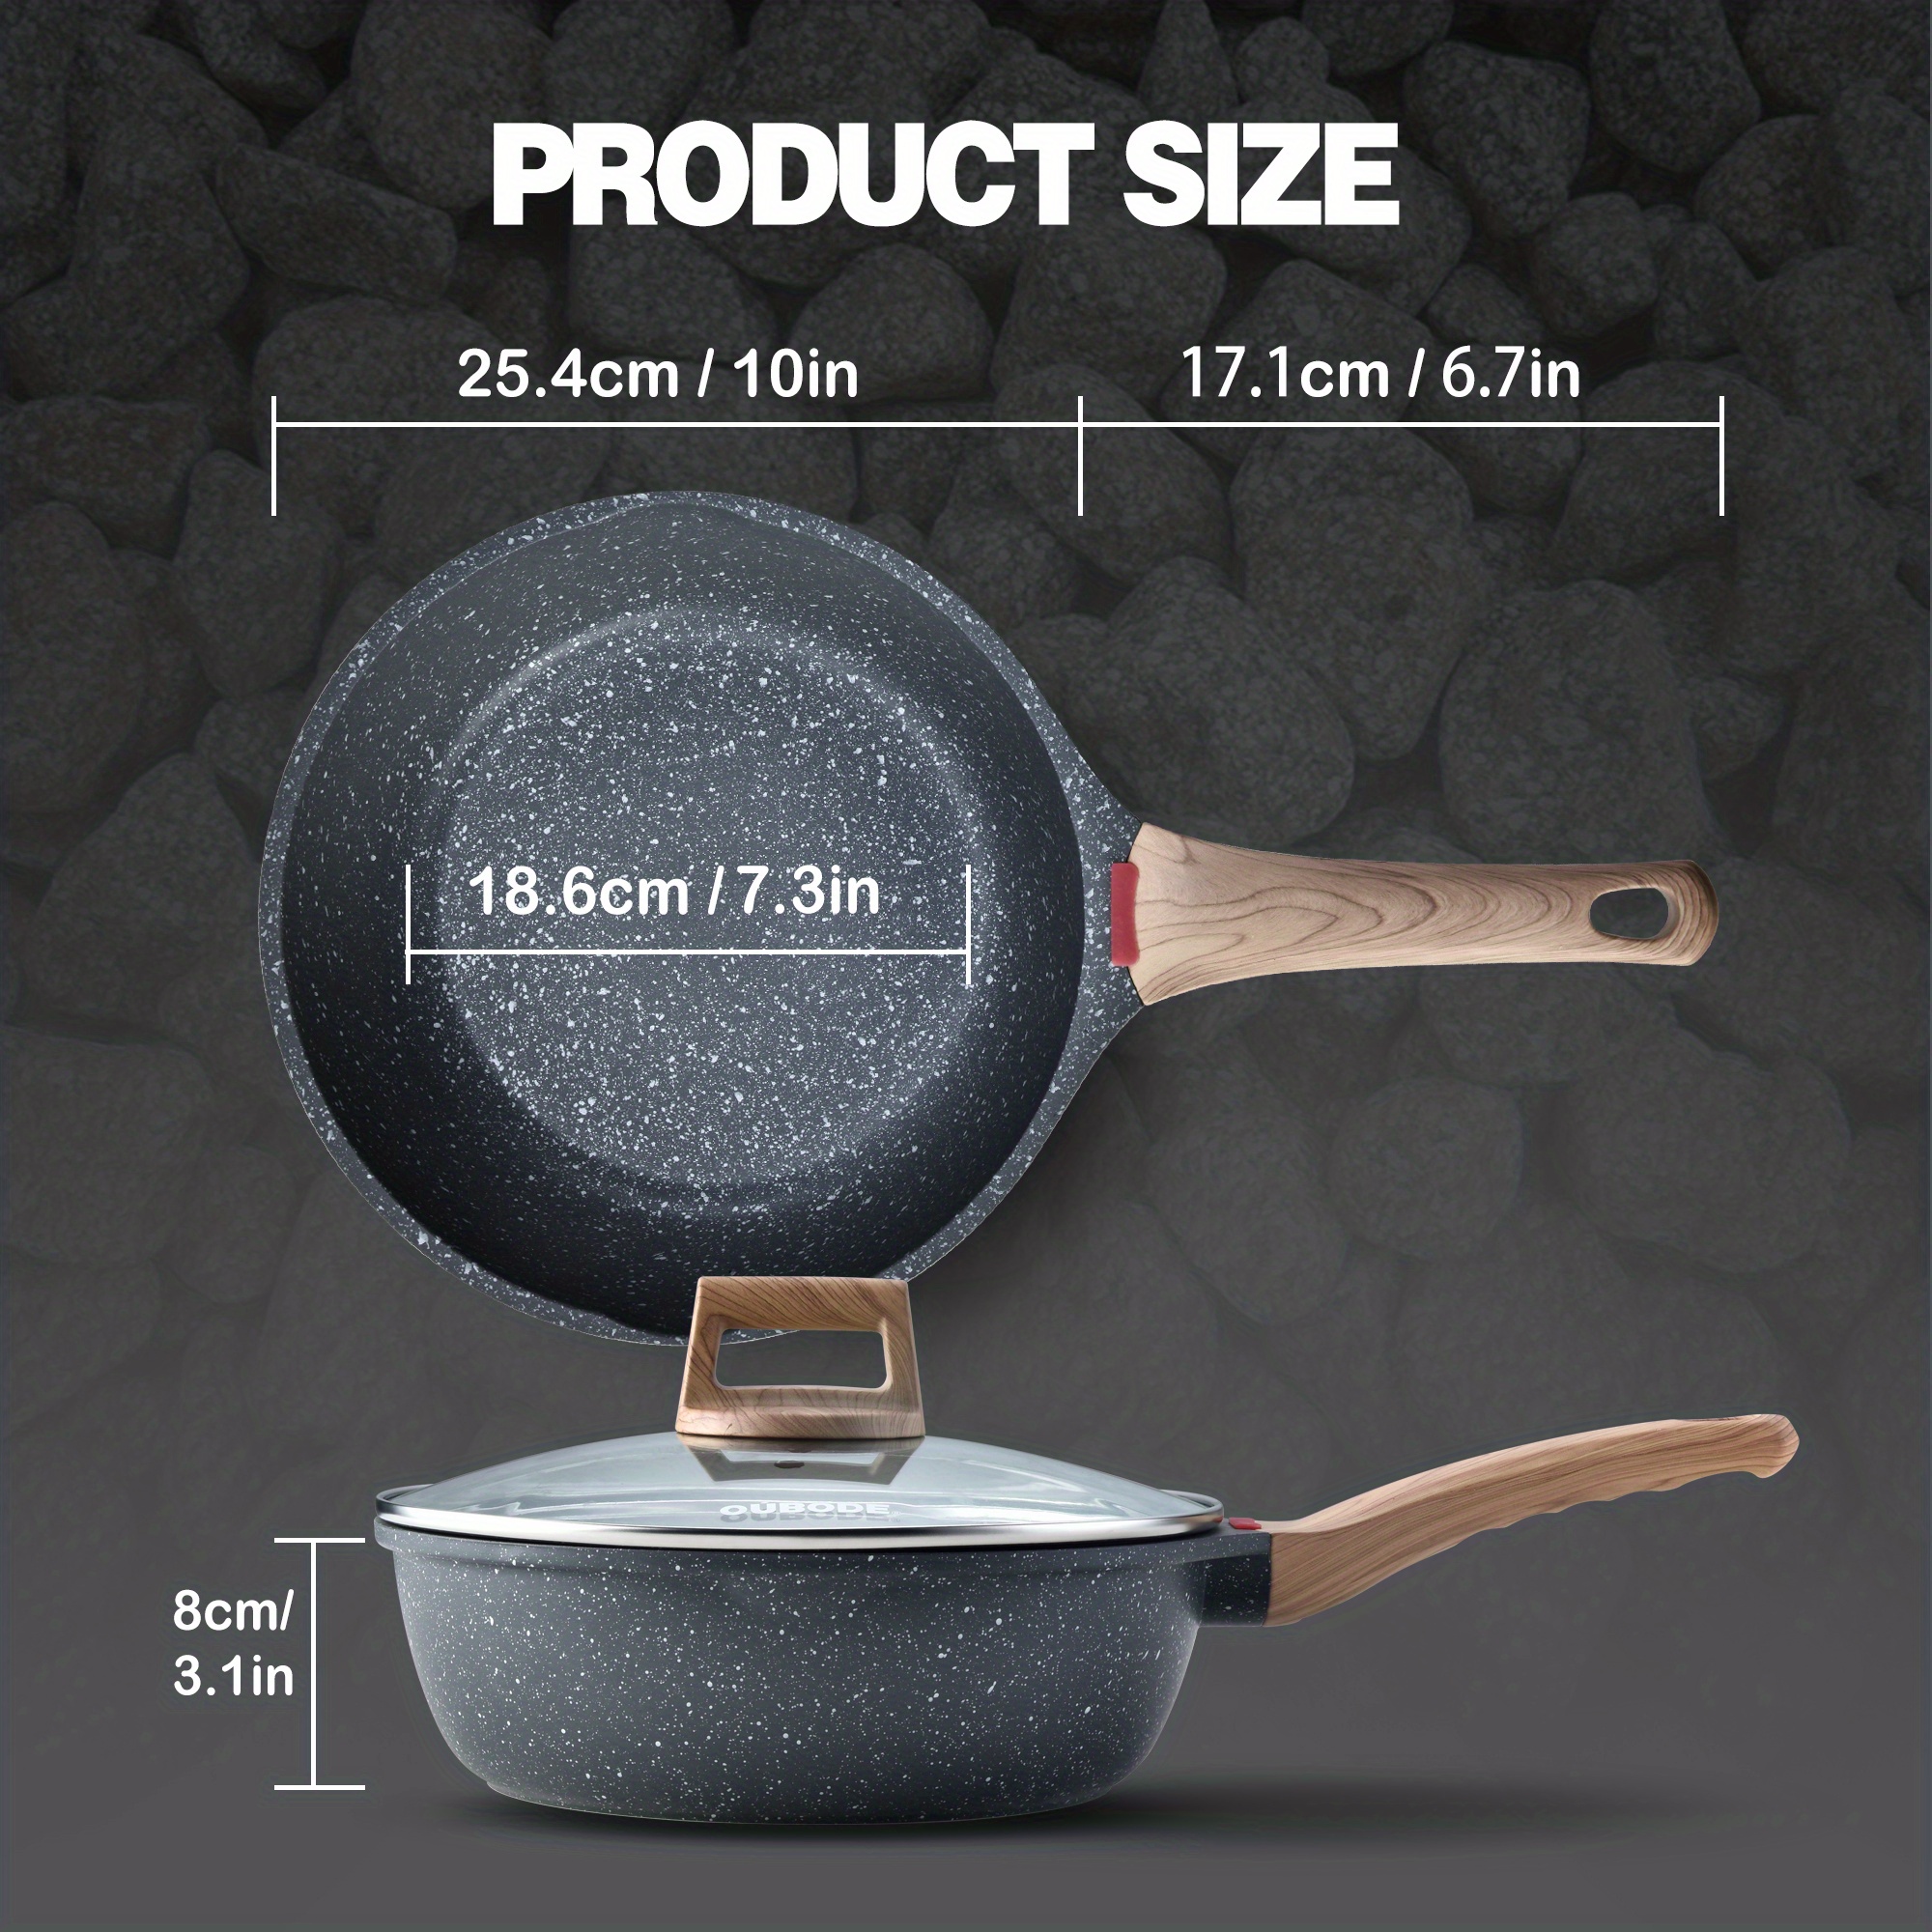 CAROTE Nonstick Deep Frying Pan with Lid, 11 Inch Skillet Saute Pan  Induction Cookware, Non Stick Granite Frying Pan for Cooking, PFOA Free  (Classic